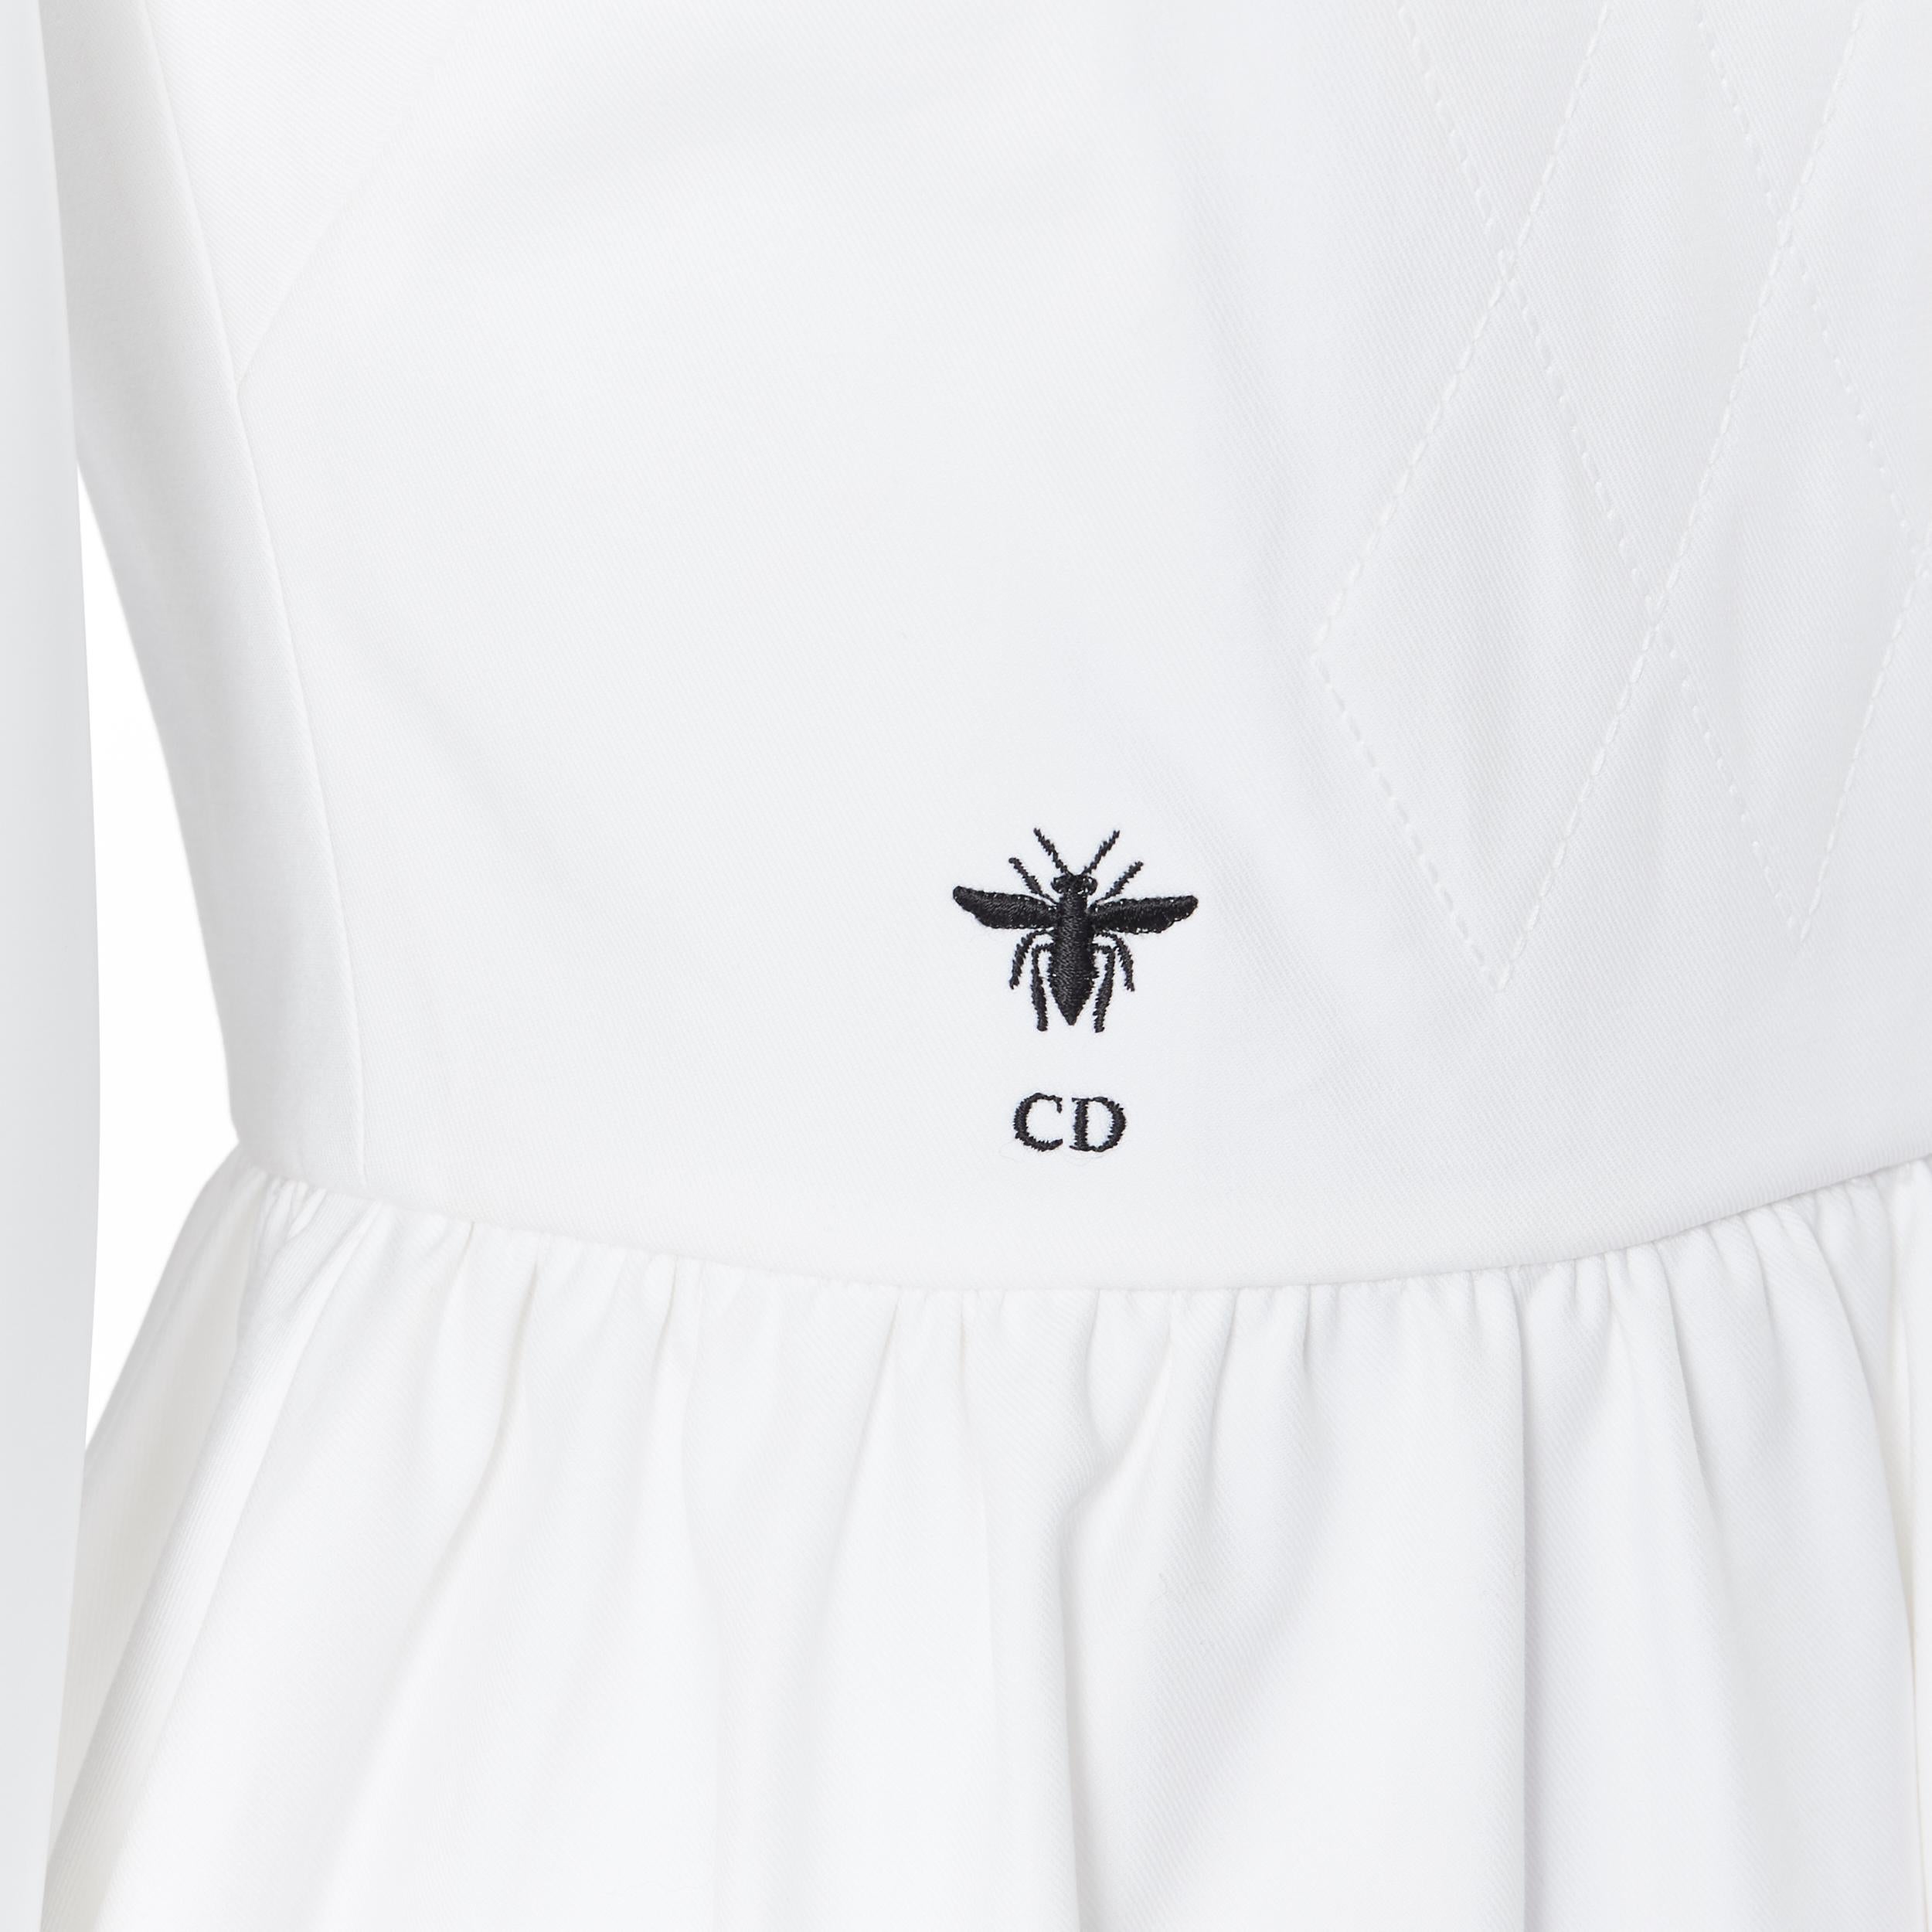 CHRISTIAN DIOR SS17 fencing diamond stitch bee embroidery fit flare dress FR34 
Brand: Christian Dior
Designer: Maria Grazia Chiuri
Collection: Spring Summer 2017
Model Name / Style: Fit flared dress
Material: Cotton
Color: White
Pattern: